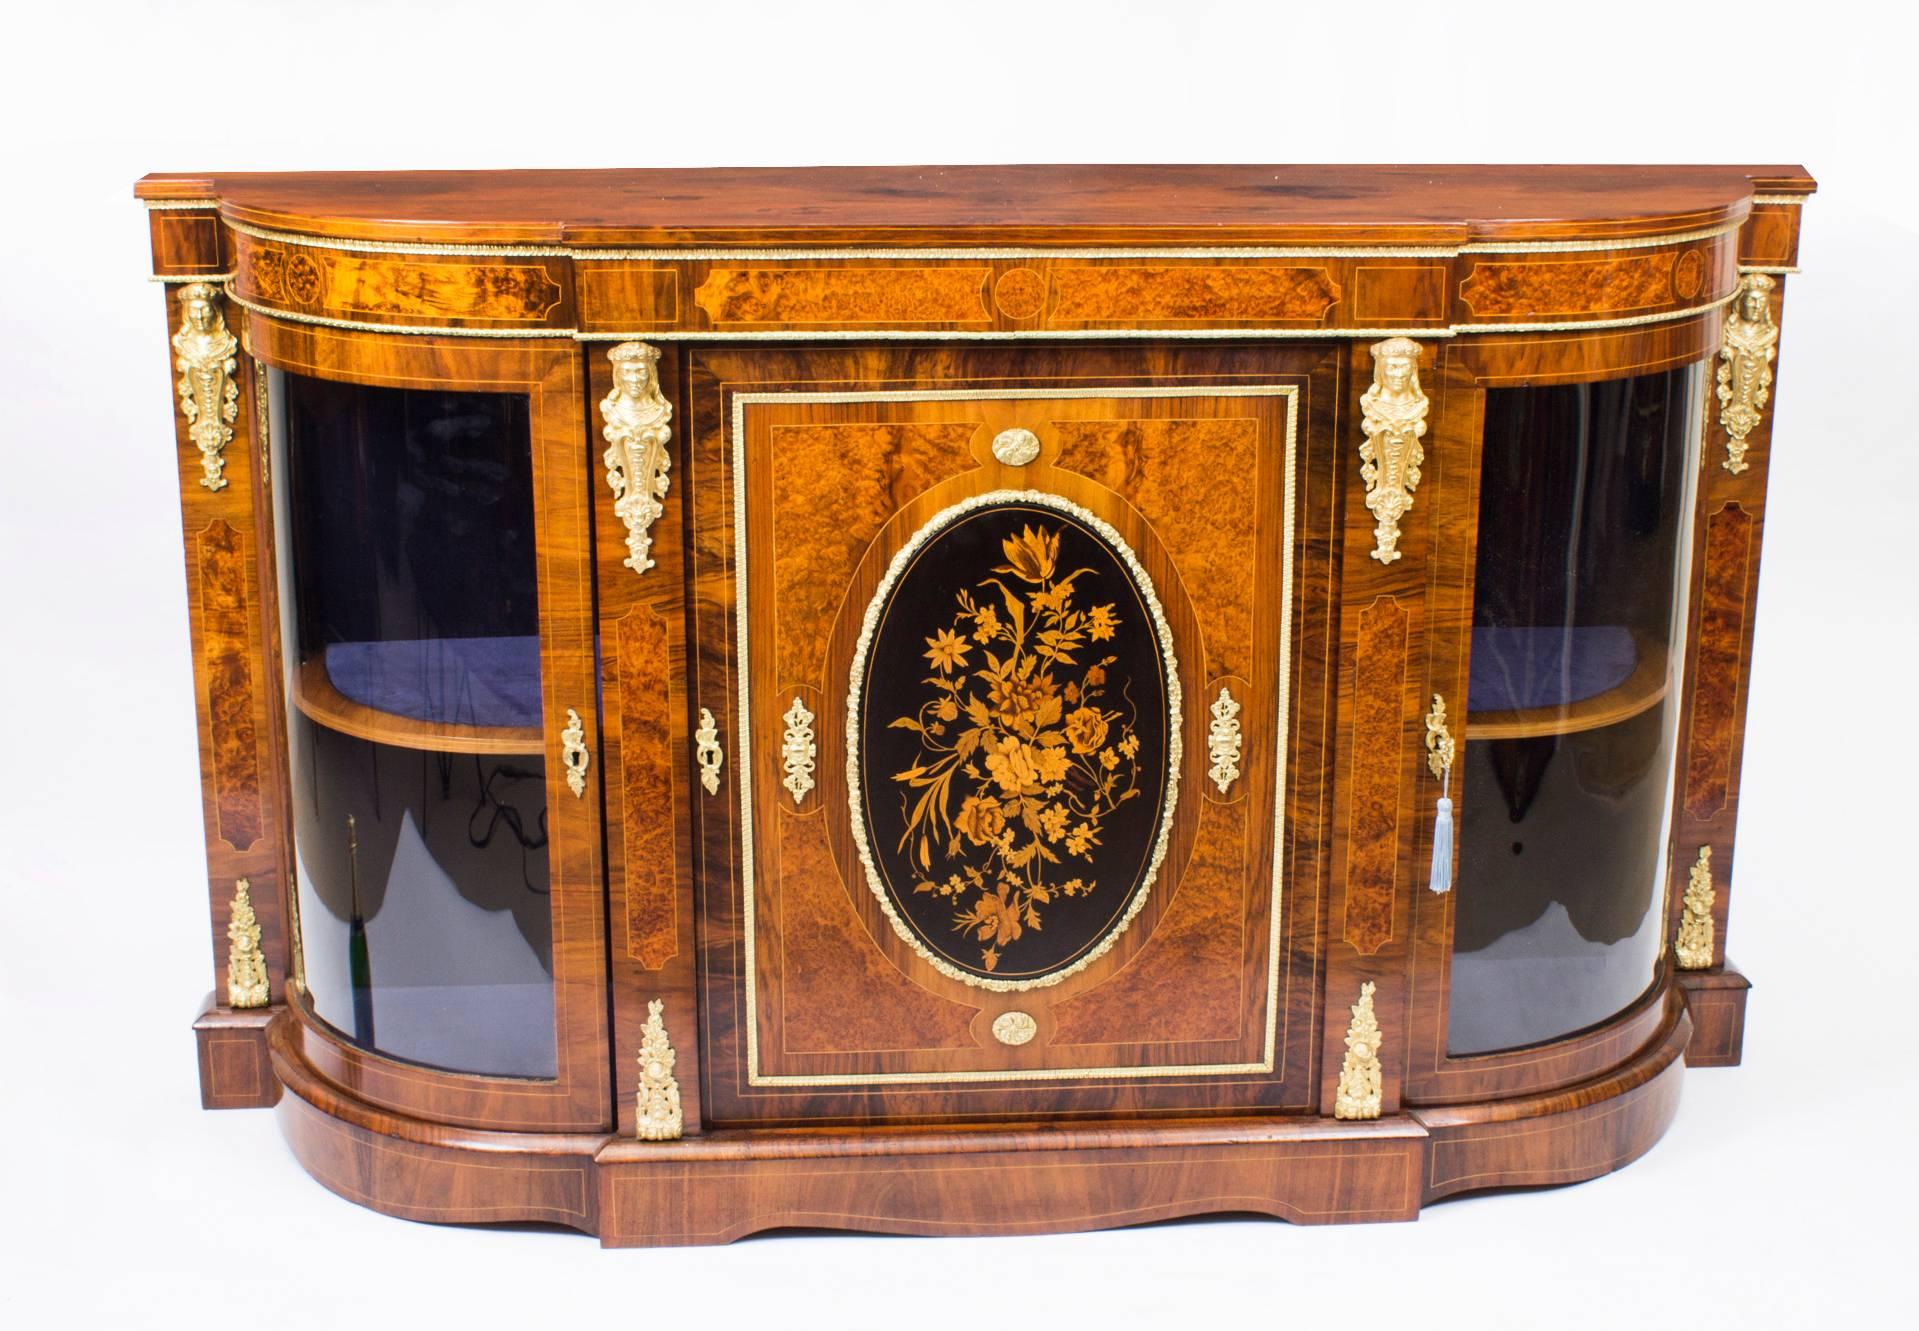 This is a superb antique Victorian burr walnut and marquetry inlaid credenza, circa 1850 in date.

Oozing sophistication and charm, this credenza is the absolute epitome of Victorian high society. Its attention to detail and lavish decoration are